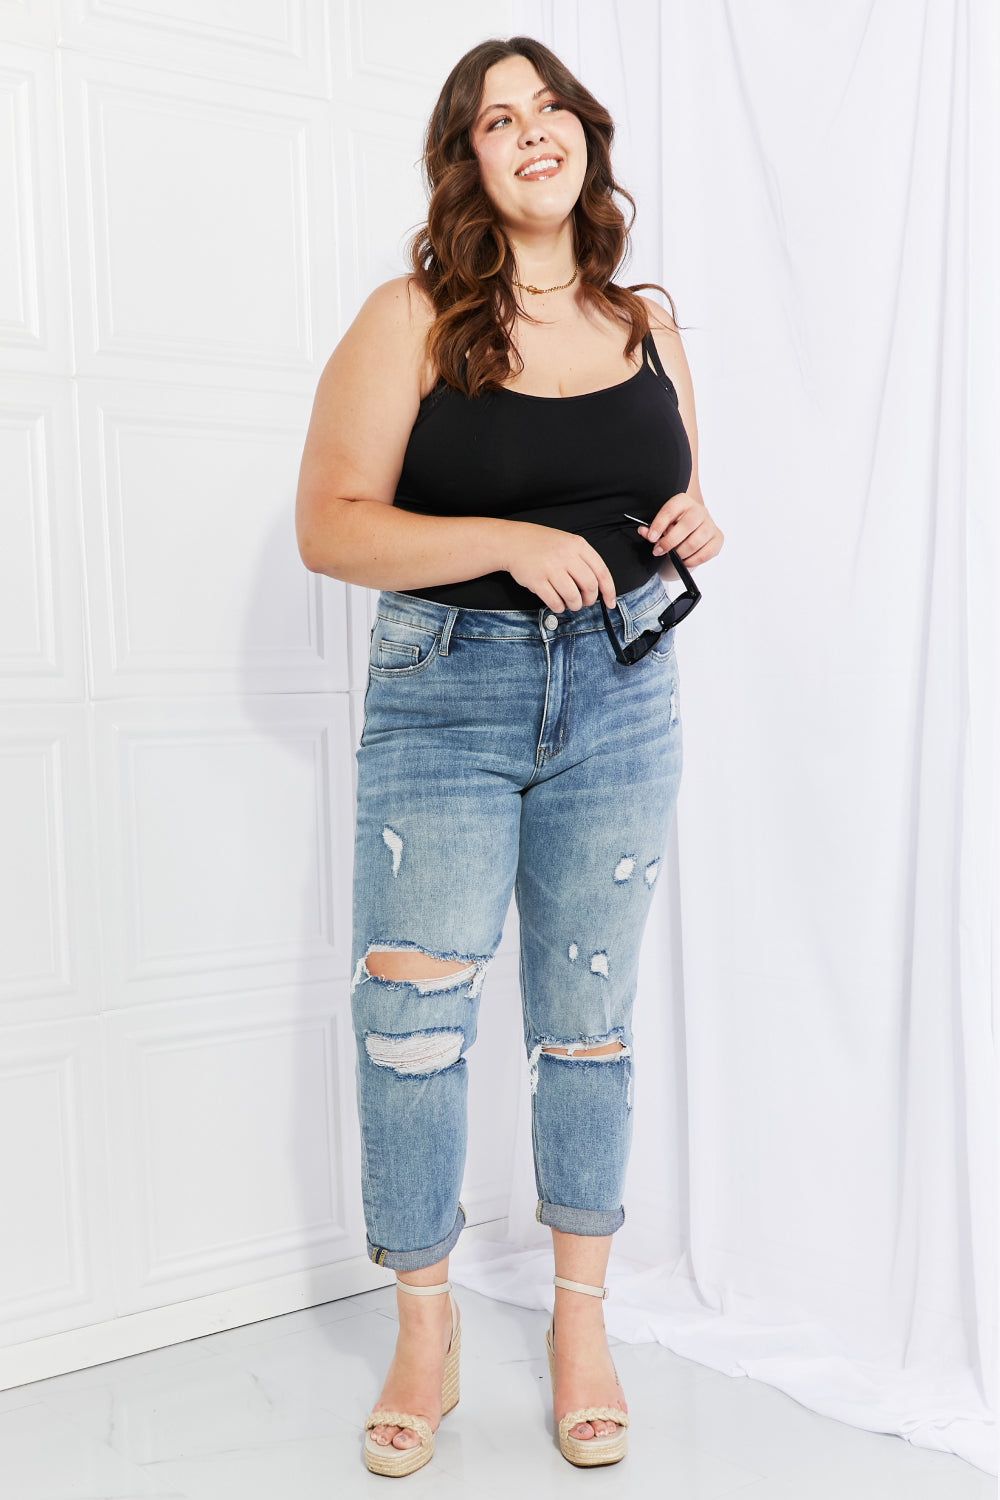 Full Size Distressed Jeans